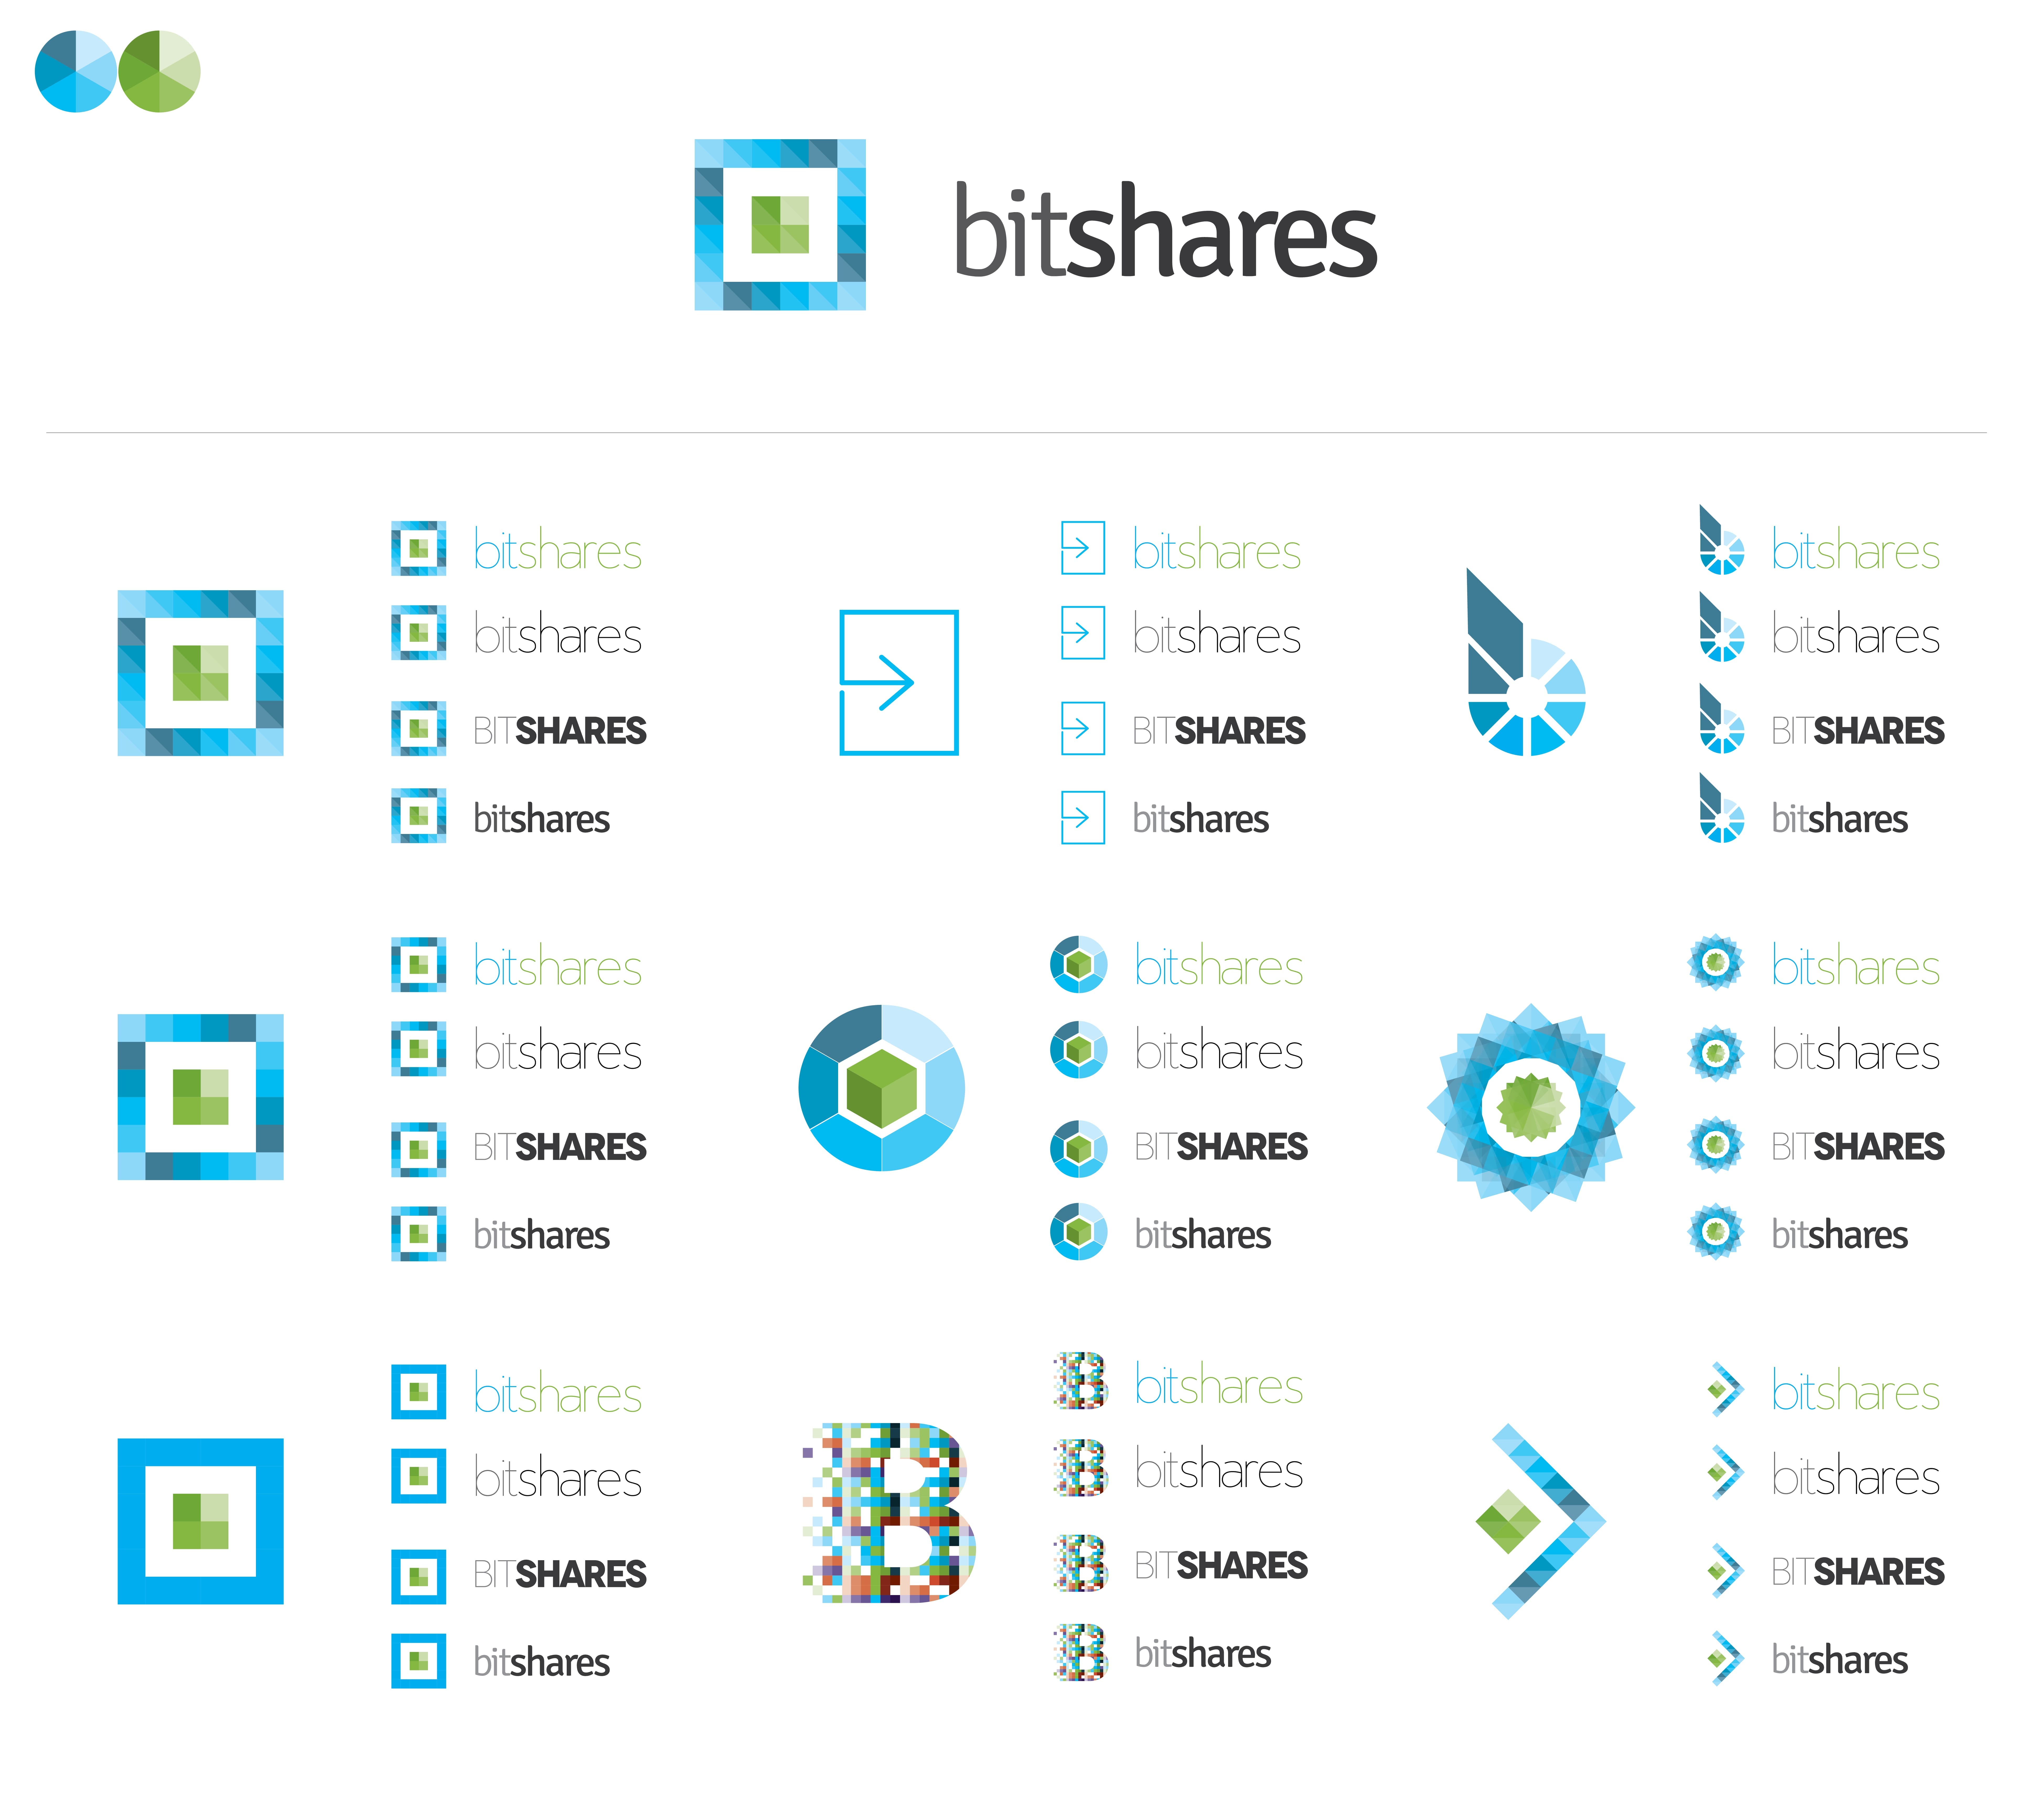 Web design agencies create different logo options for clients to choose from. Here are different options for bitshares.